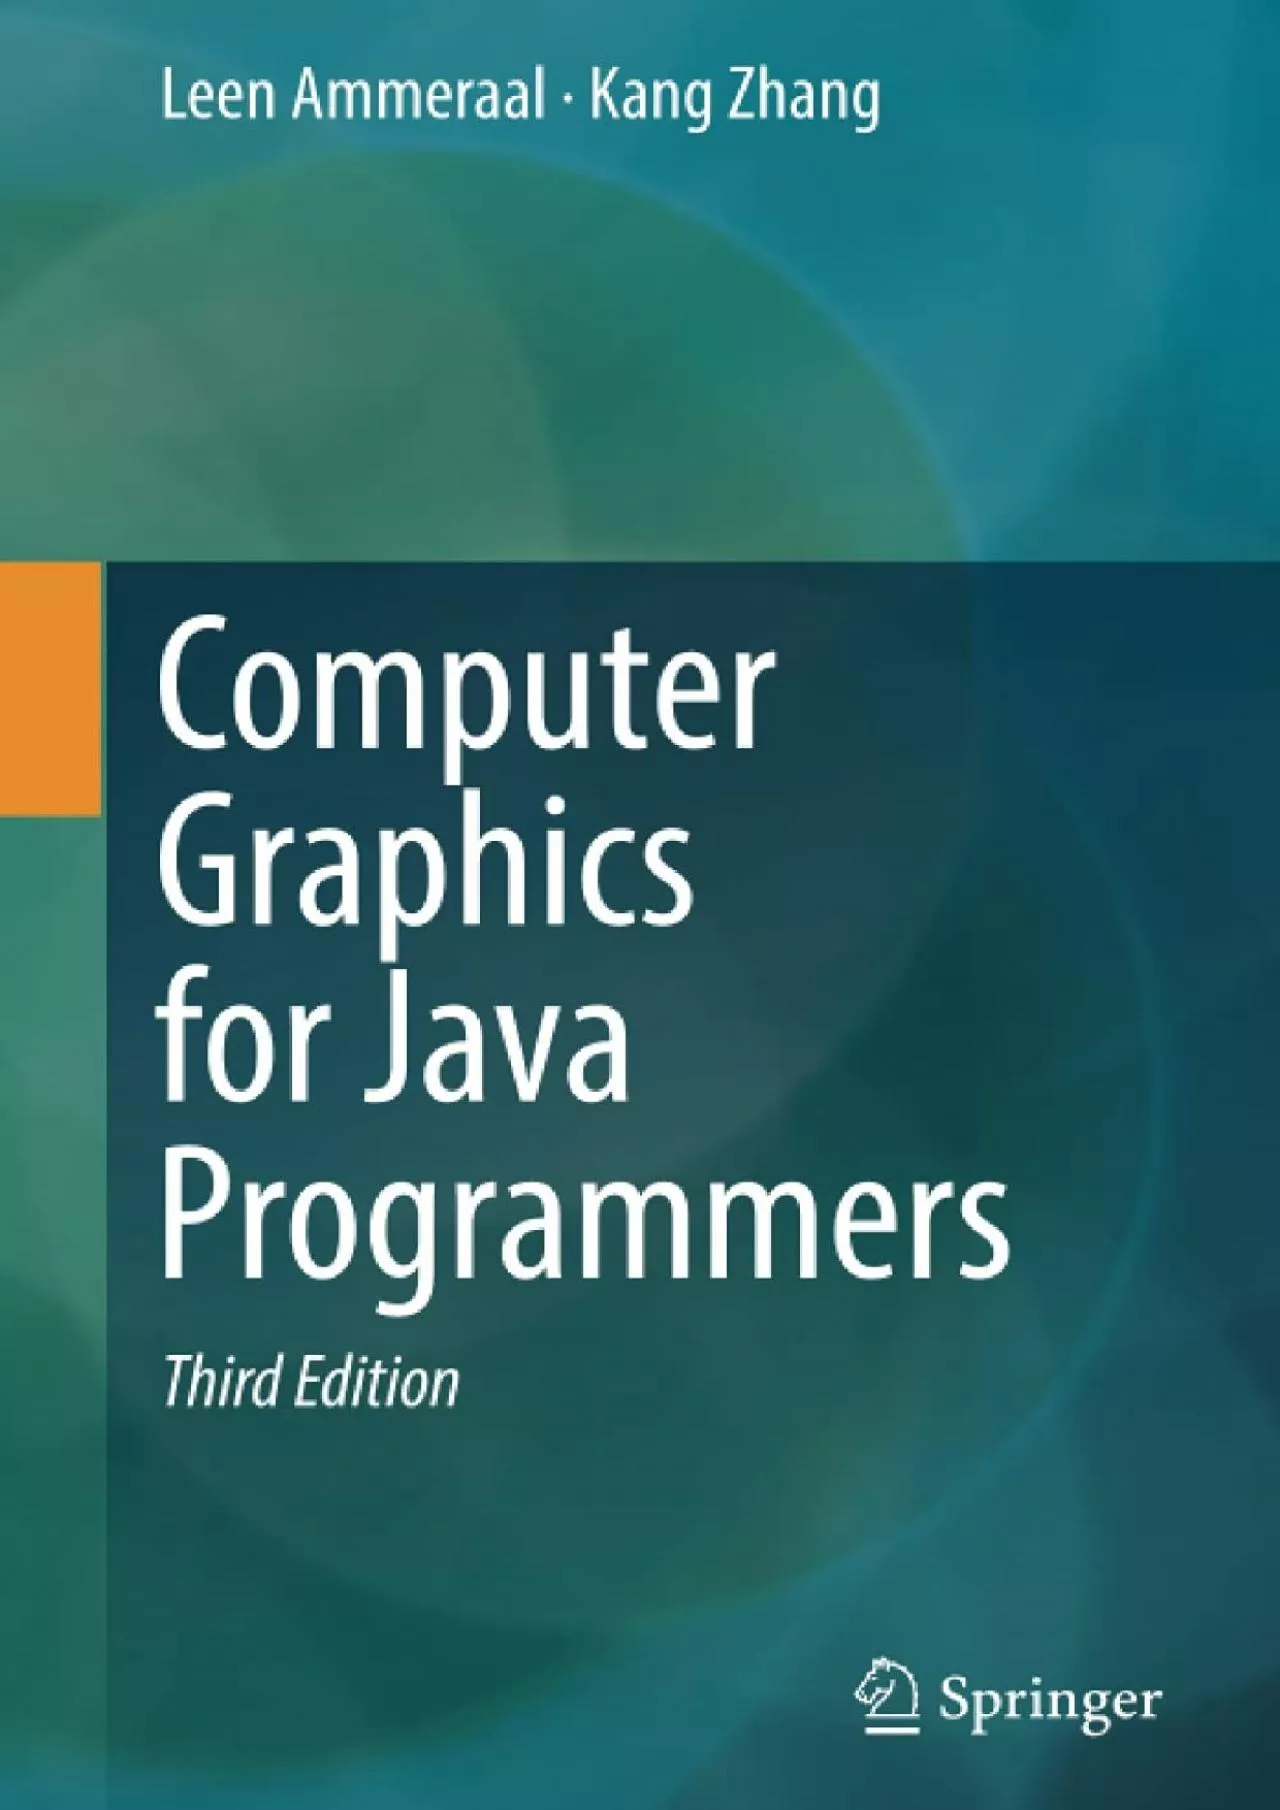 [eBOOK]-Computer Graphics for Java Programmers